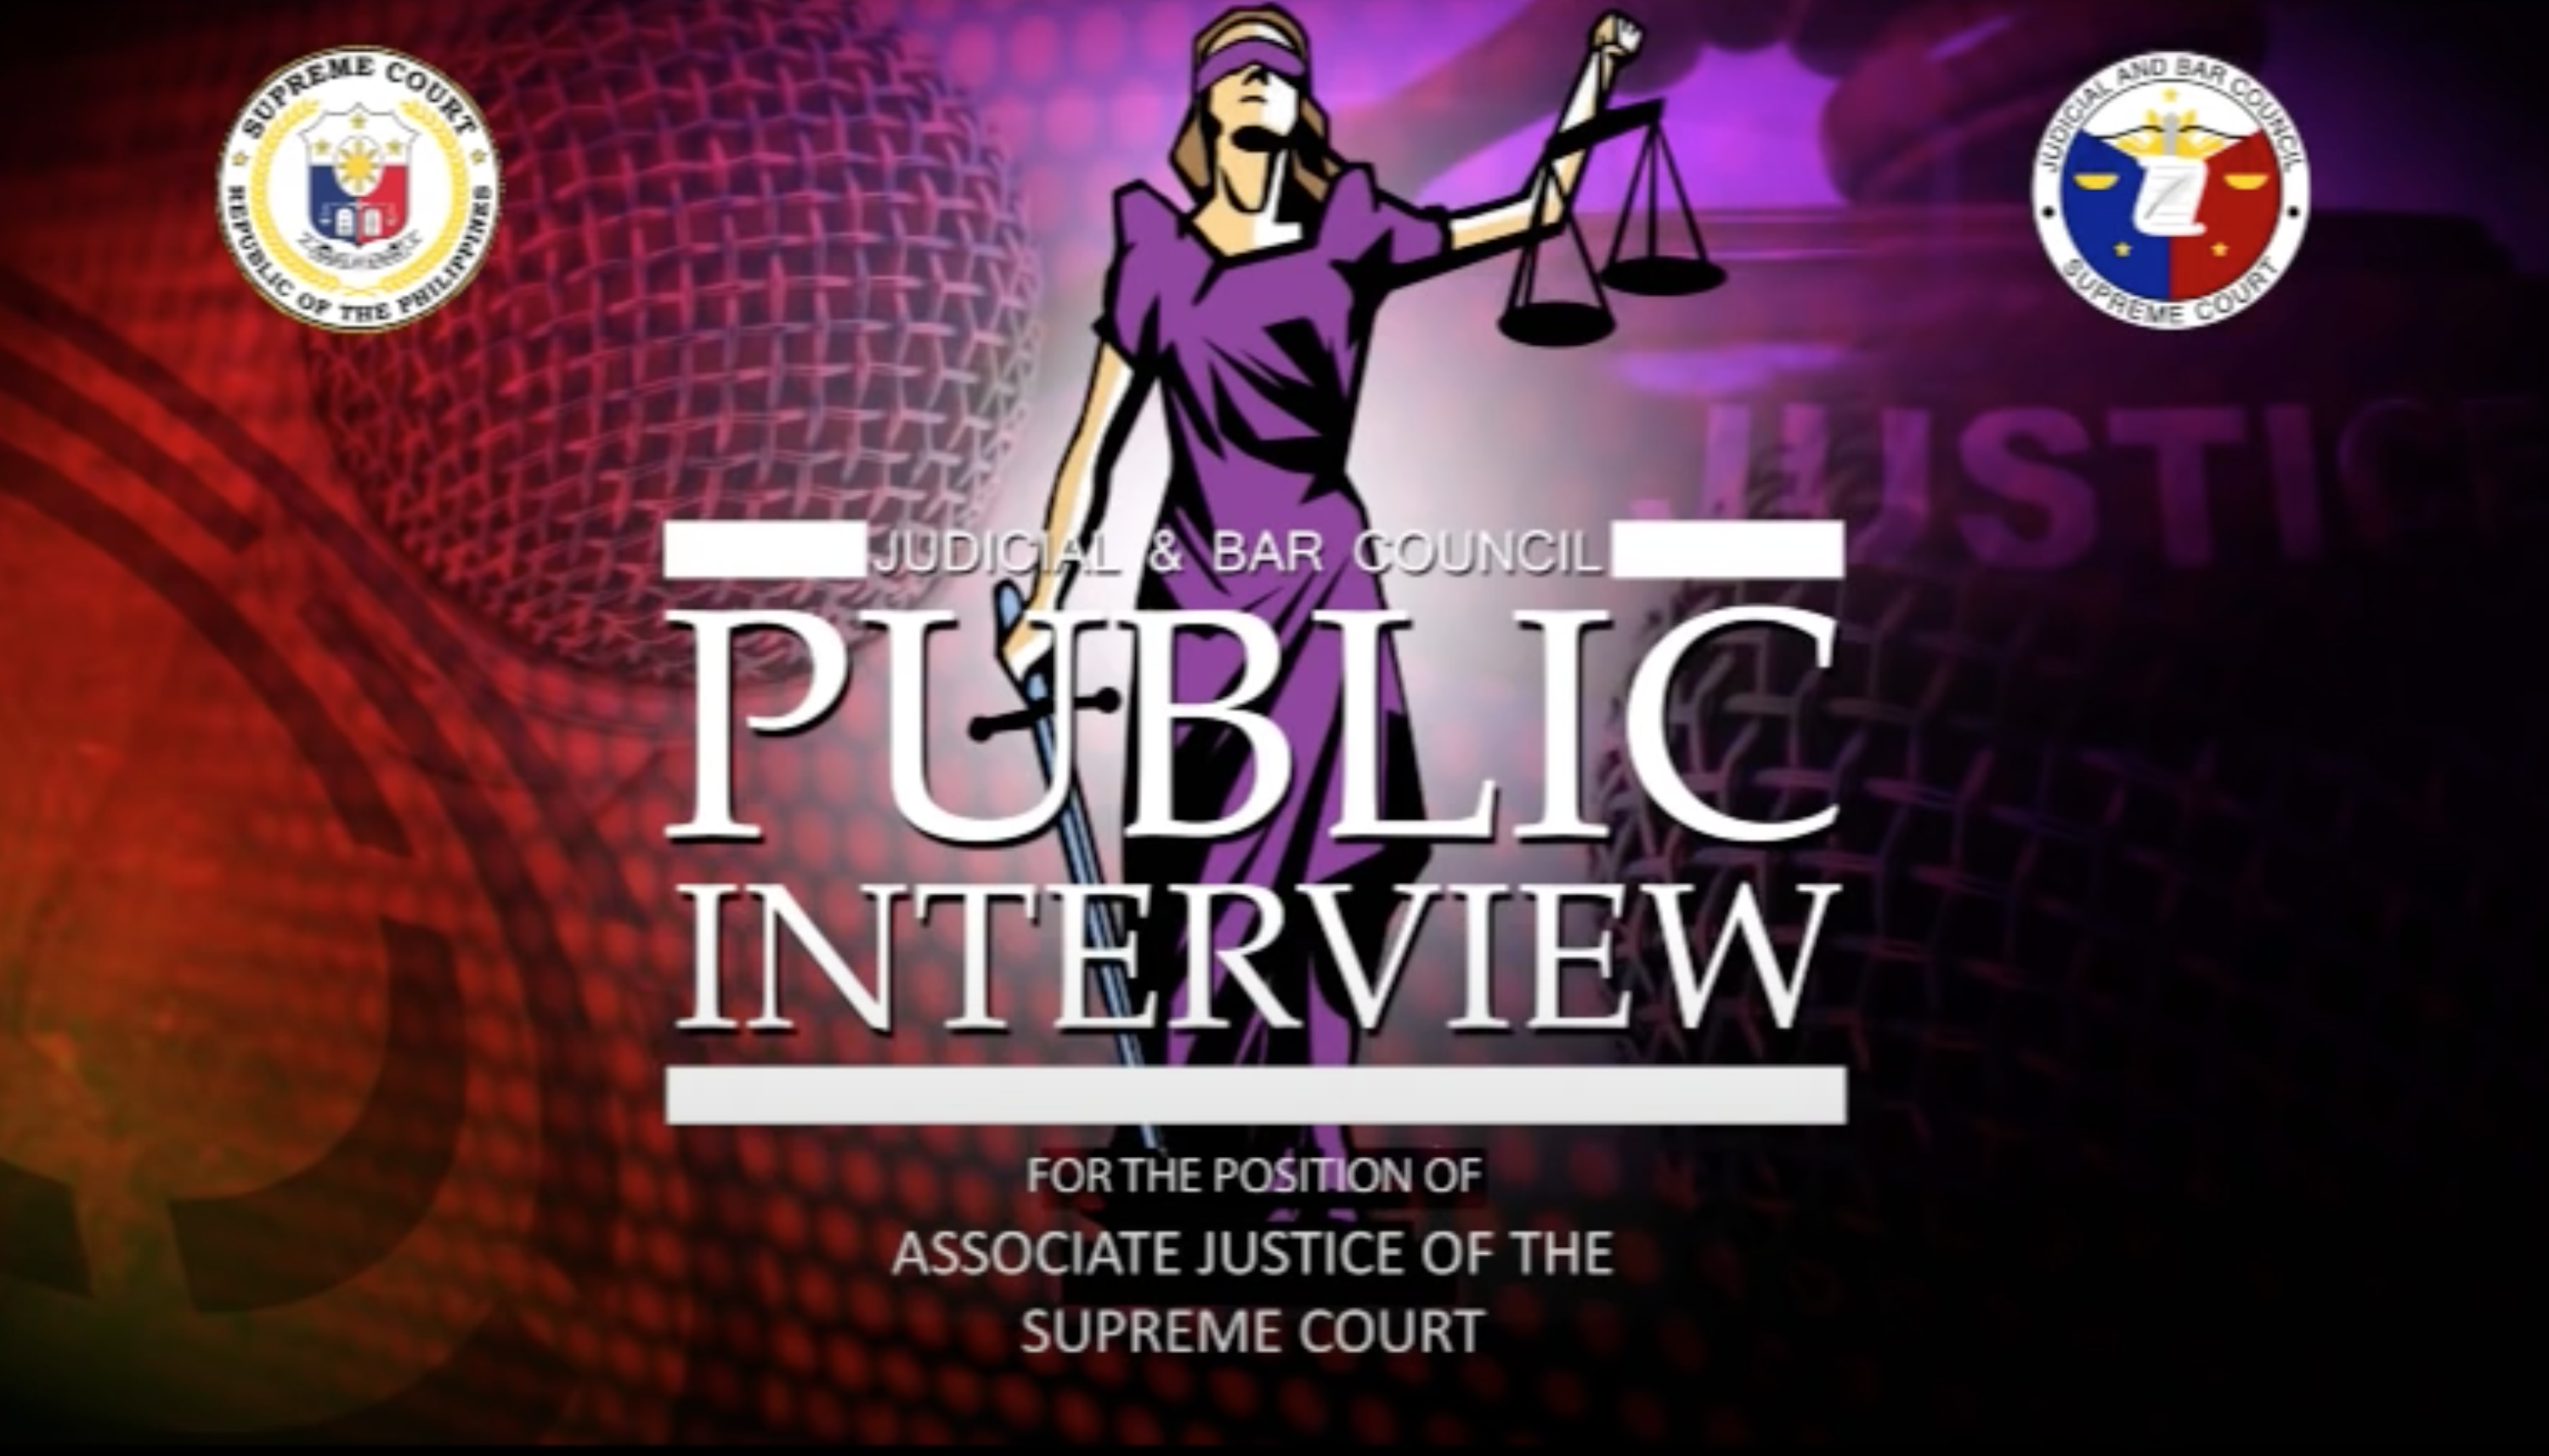 Solicitor General Florin T. Hilbay interviewed by the Judicial and Bar Council